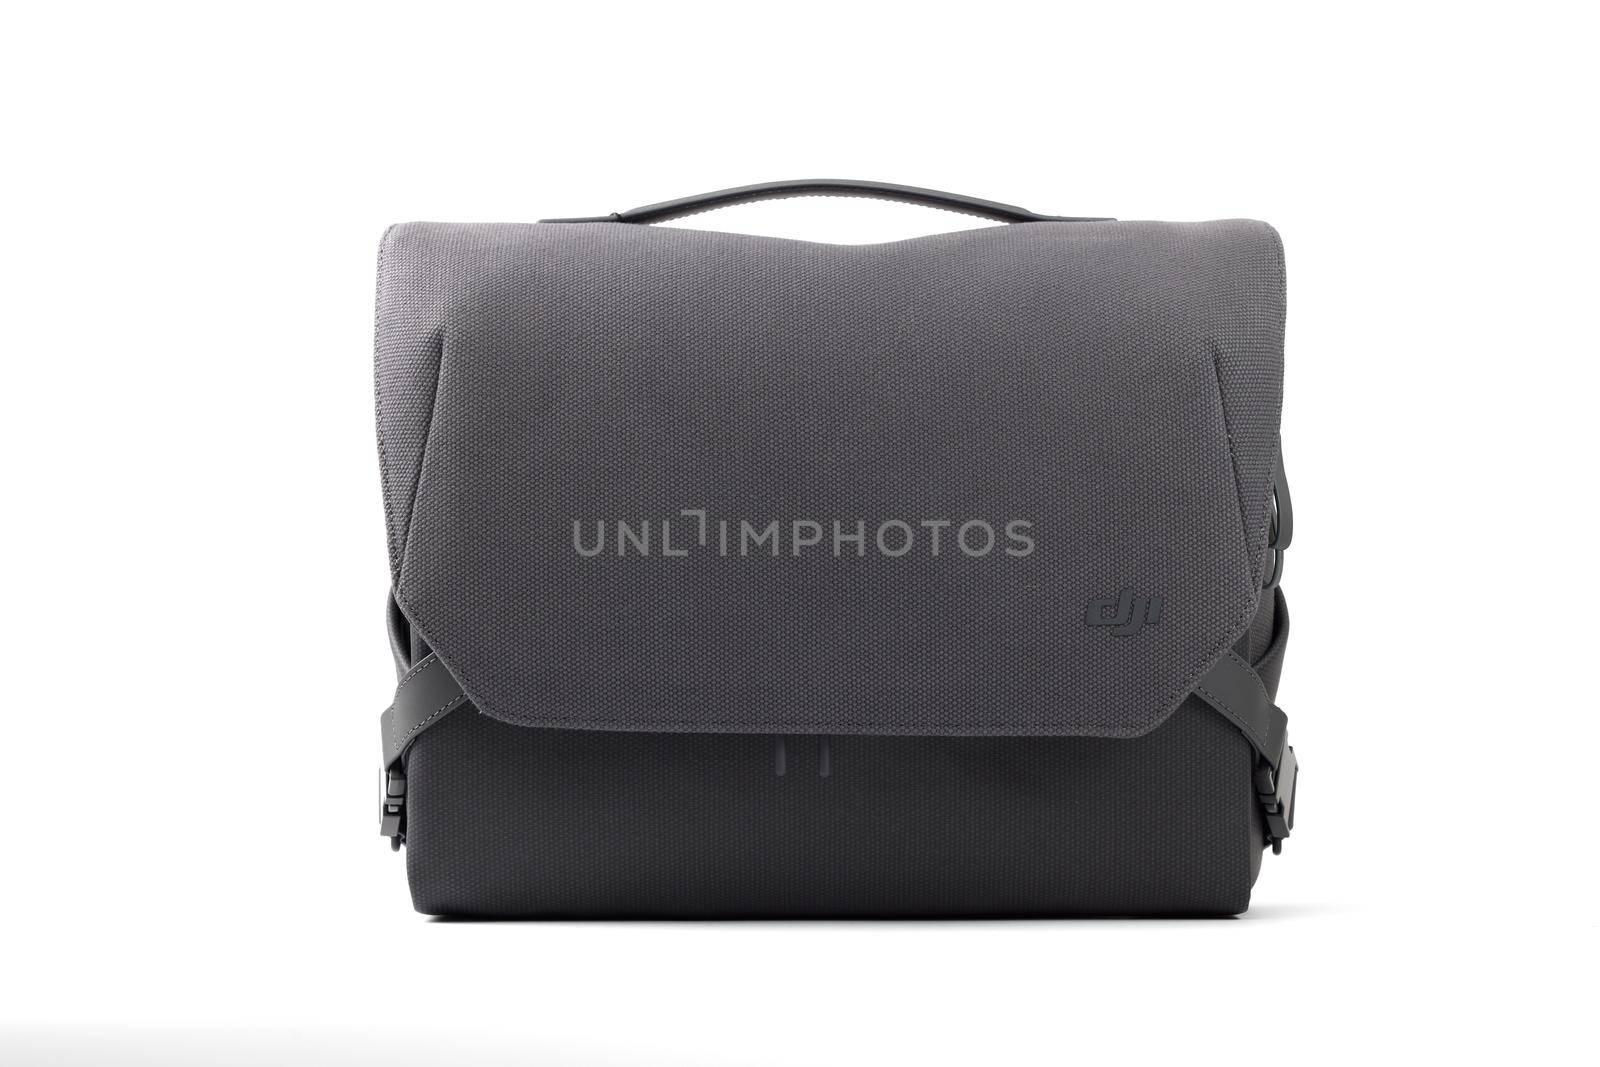 New DJI Mavic 3 Drone bag isolated on white. Accessory for carrying and storing the quadcopter. DJI world leader developer and manufacturers in UA. 17.12.2021, Rostov region, Russia by EvgeniyQW